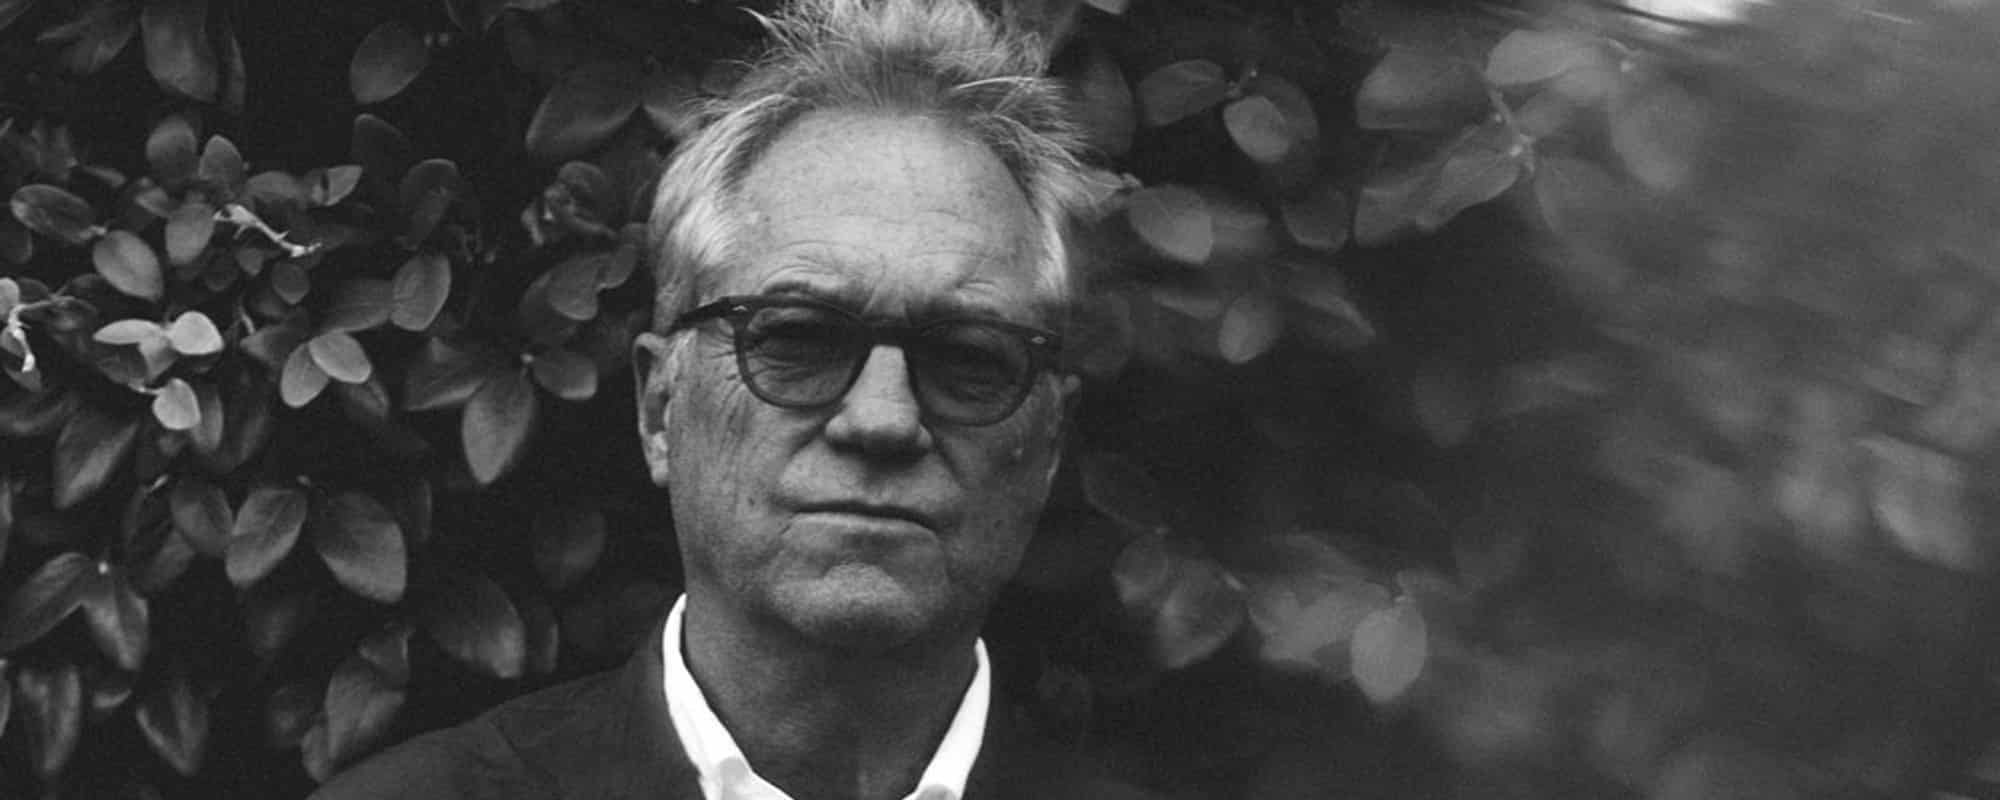 An American Journeyman, Gerry Beckley Shares His Solo Sojourn